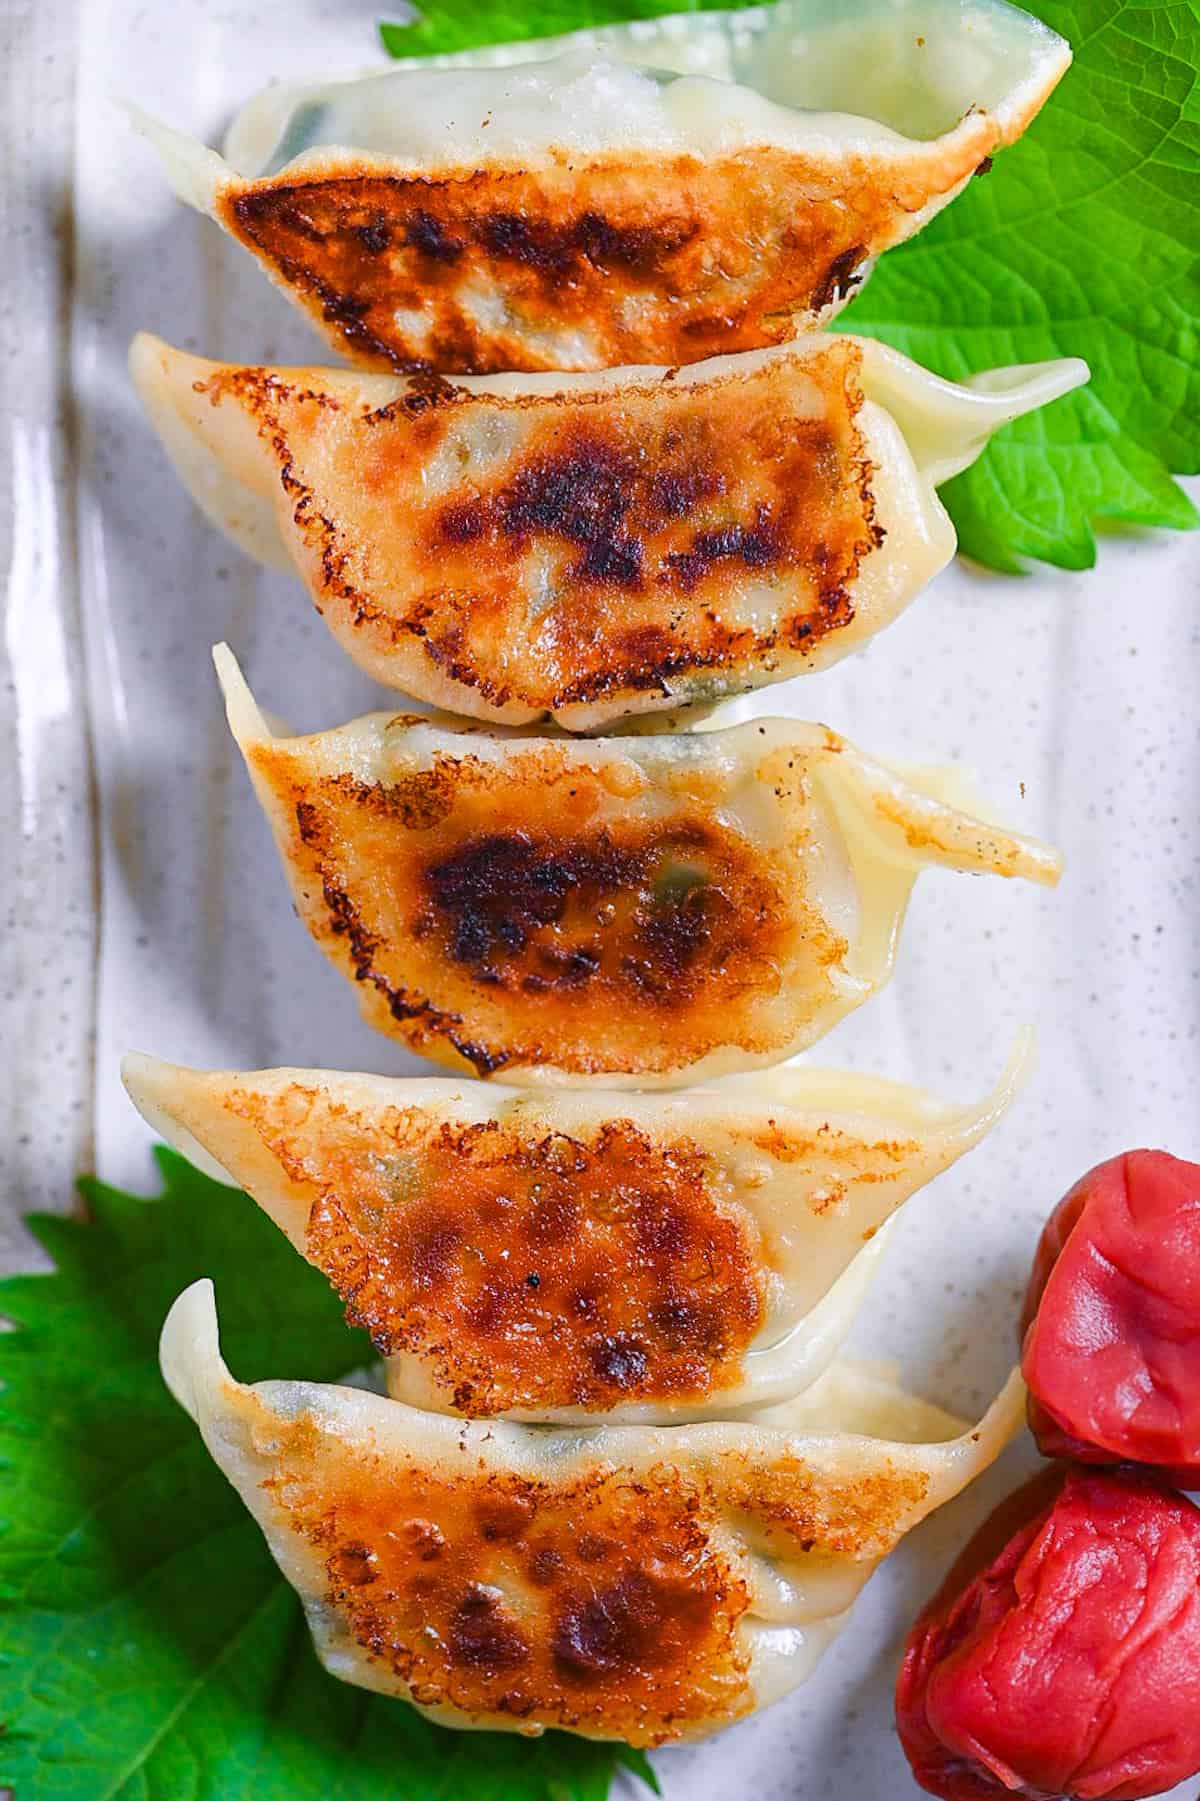 Chicken gyoza with umeboshi and perilla leaves (shiso) on a cream rectangular plate with ponzu dipping sauce